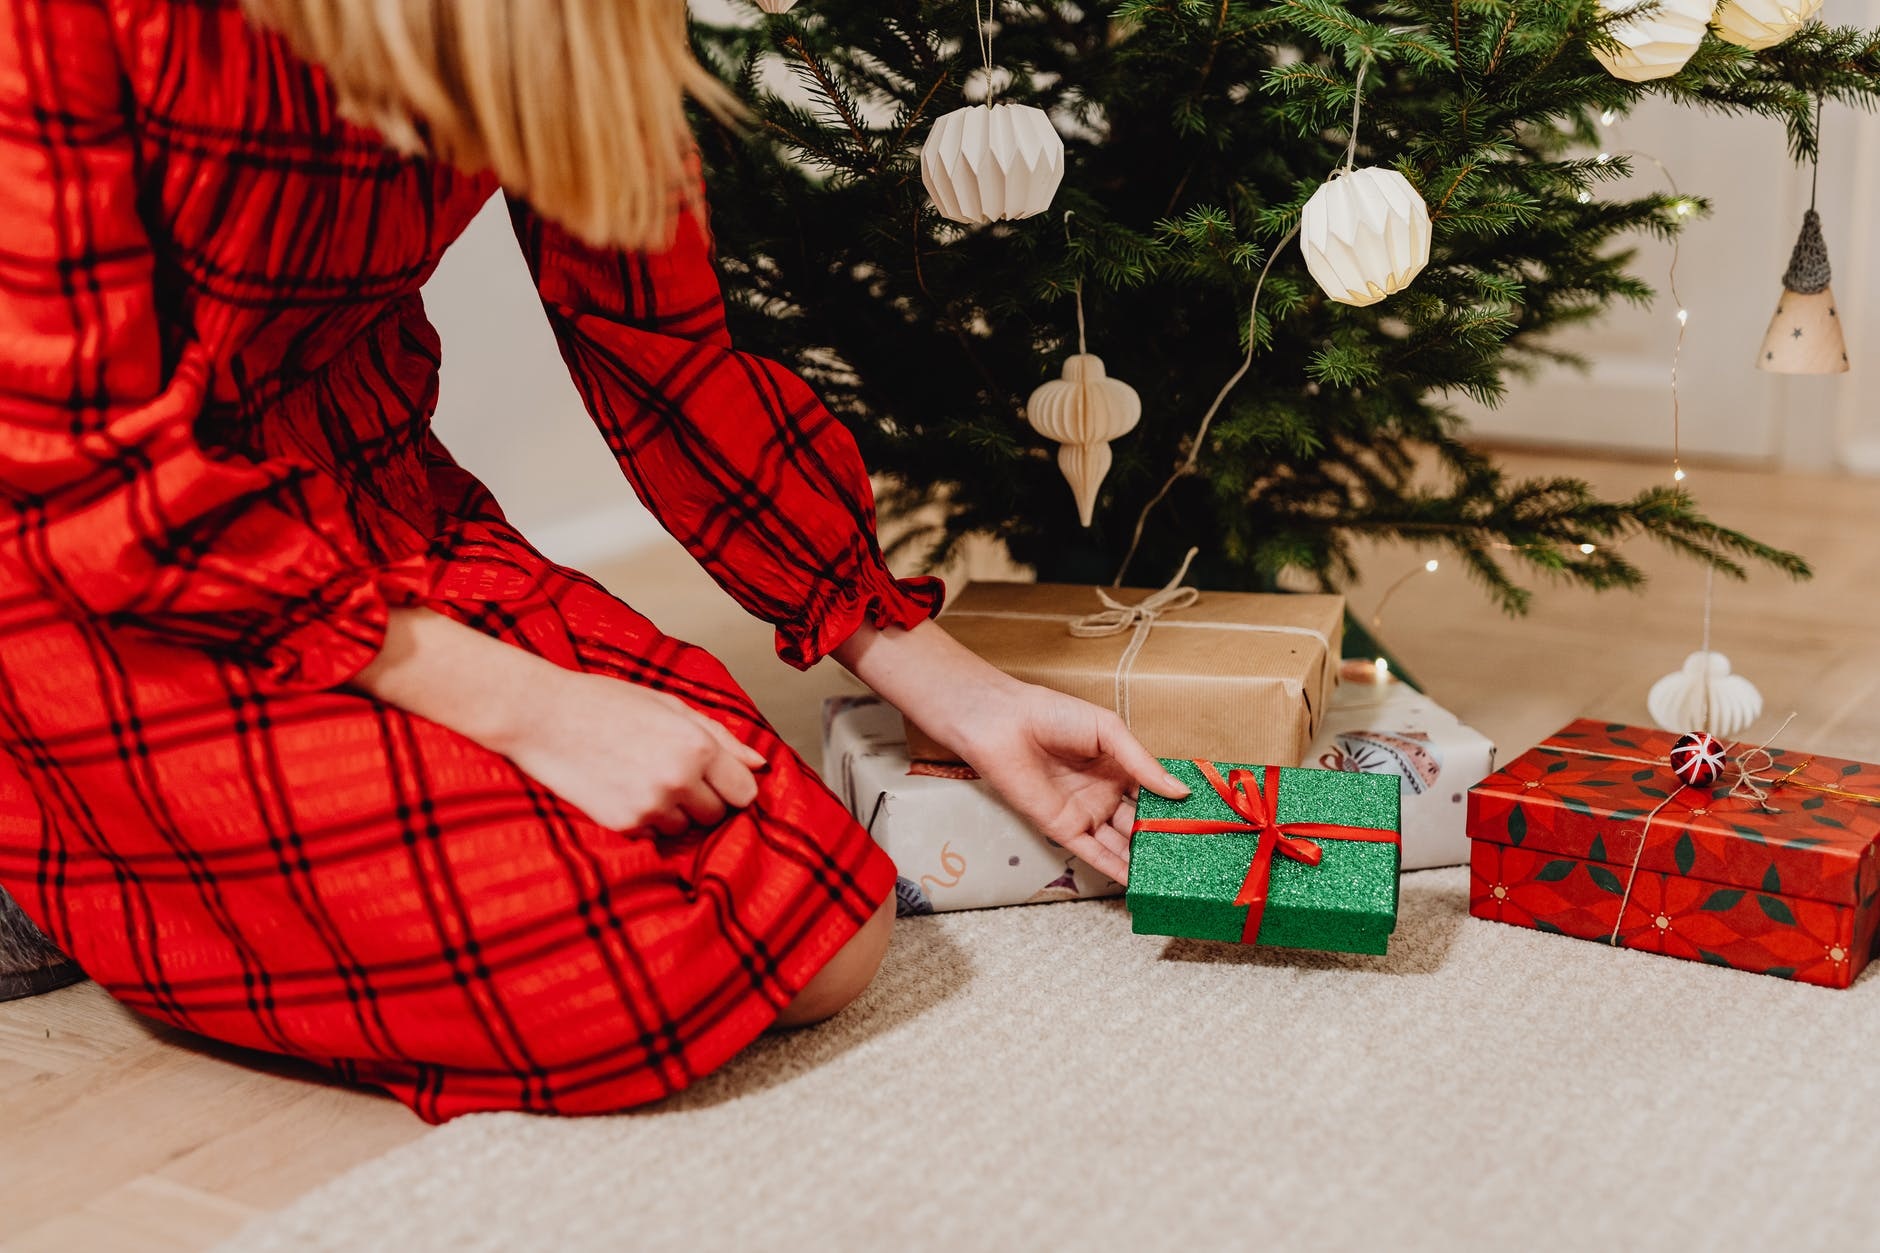 Here’s what you should put on your wishlist for Christmas 2021